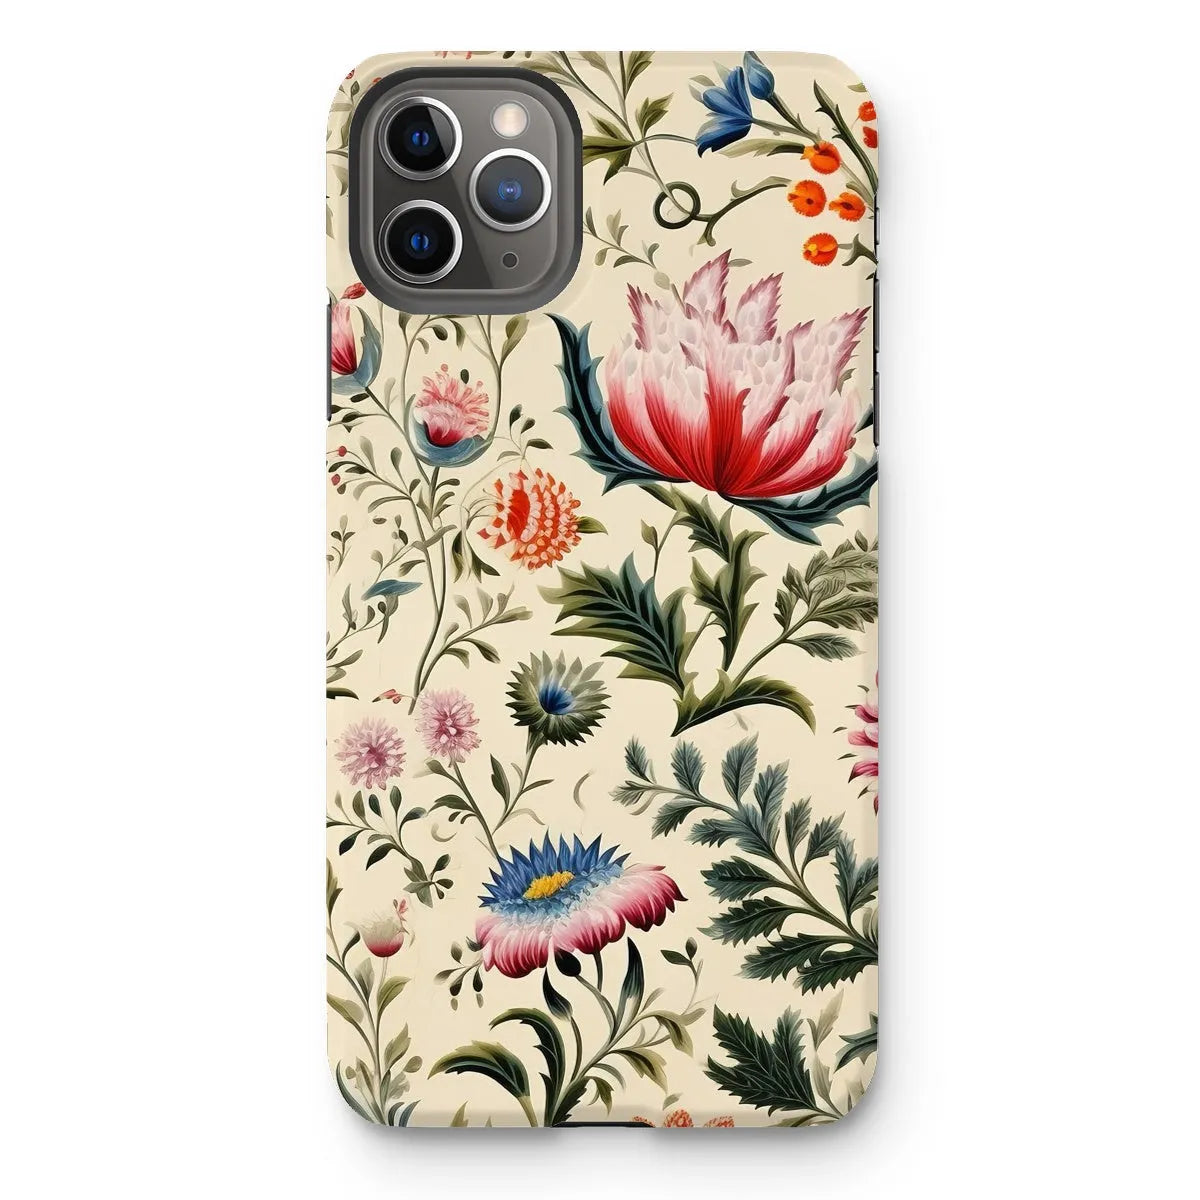 Wildflower Hoopla - Floral Garden Aesthetic Phone Case - Iphone 11 Pro Max / Matte - Mobile Phone Cases - Aesthetic Art